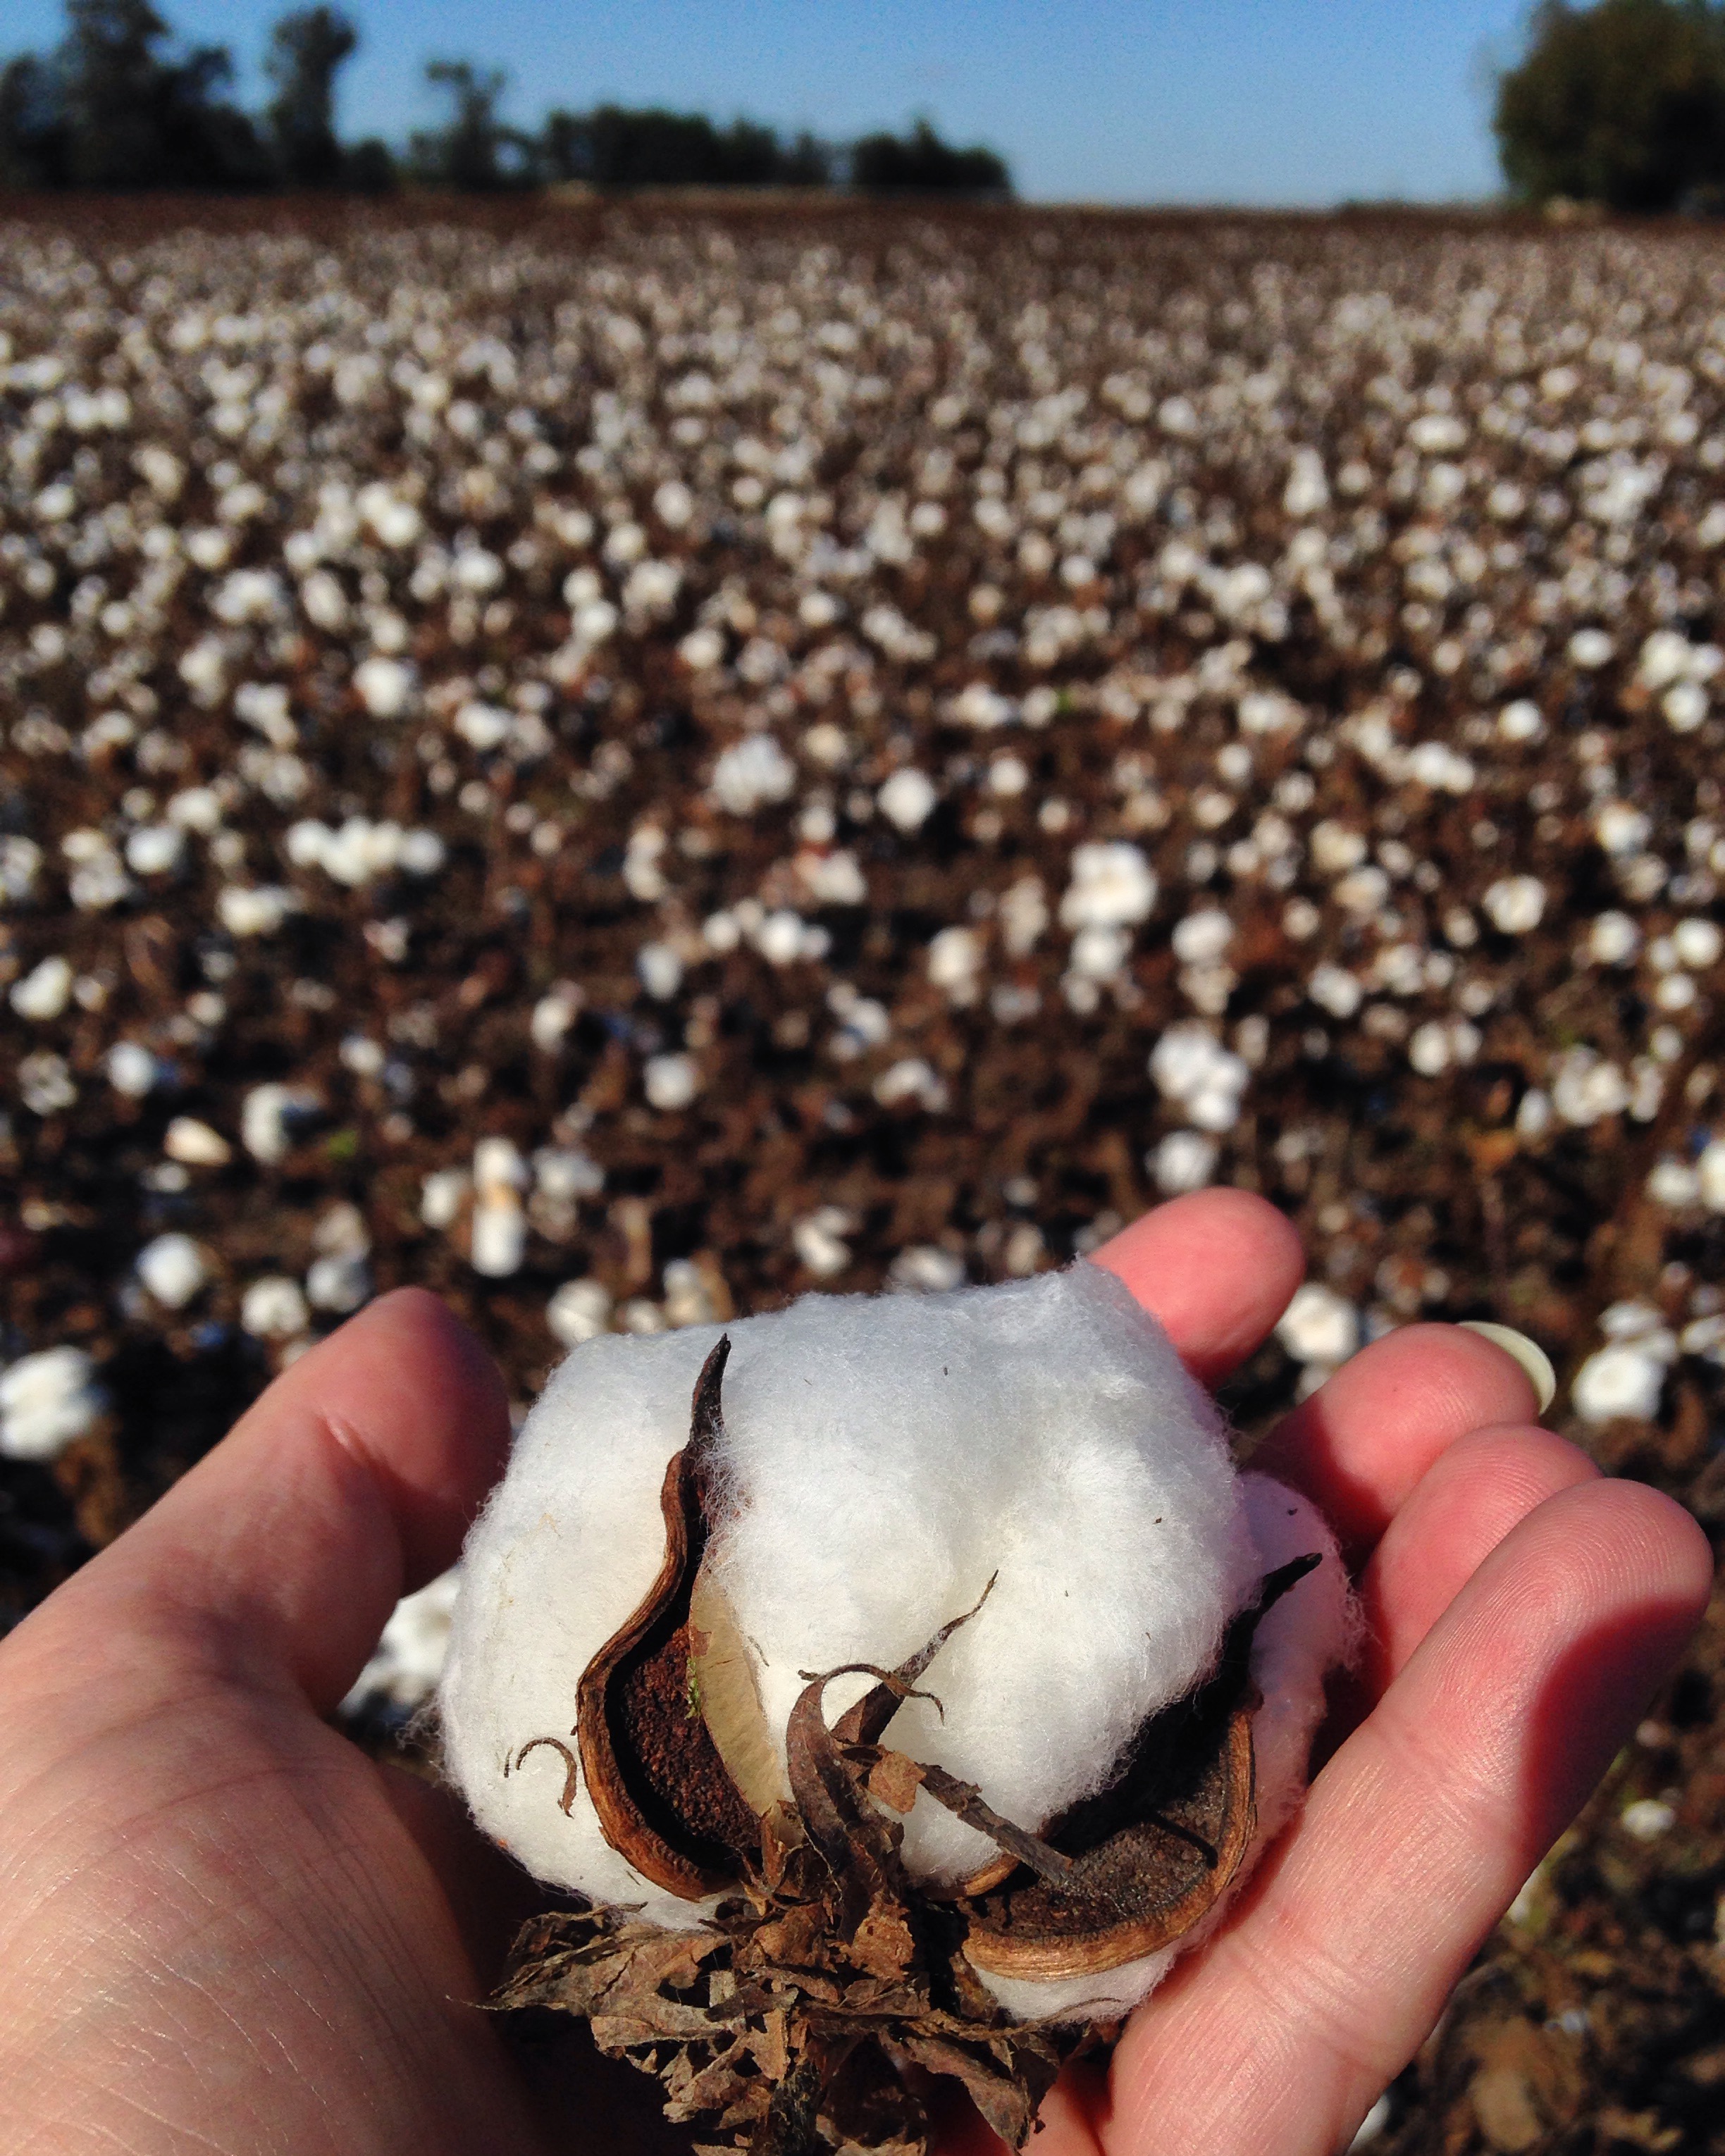 IMG: A piece of cotton.